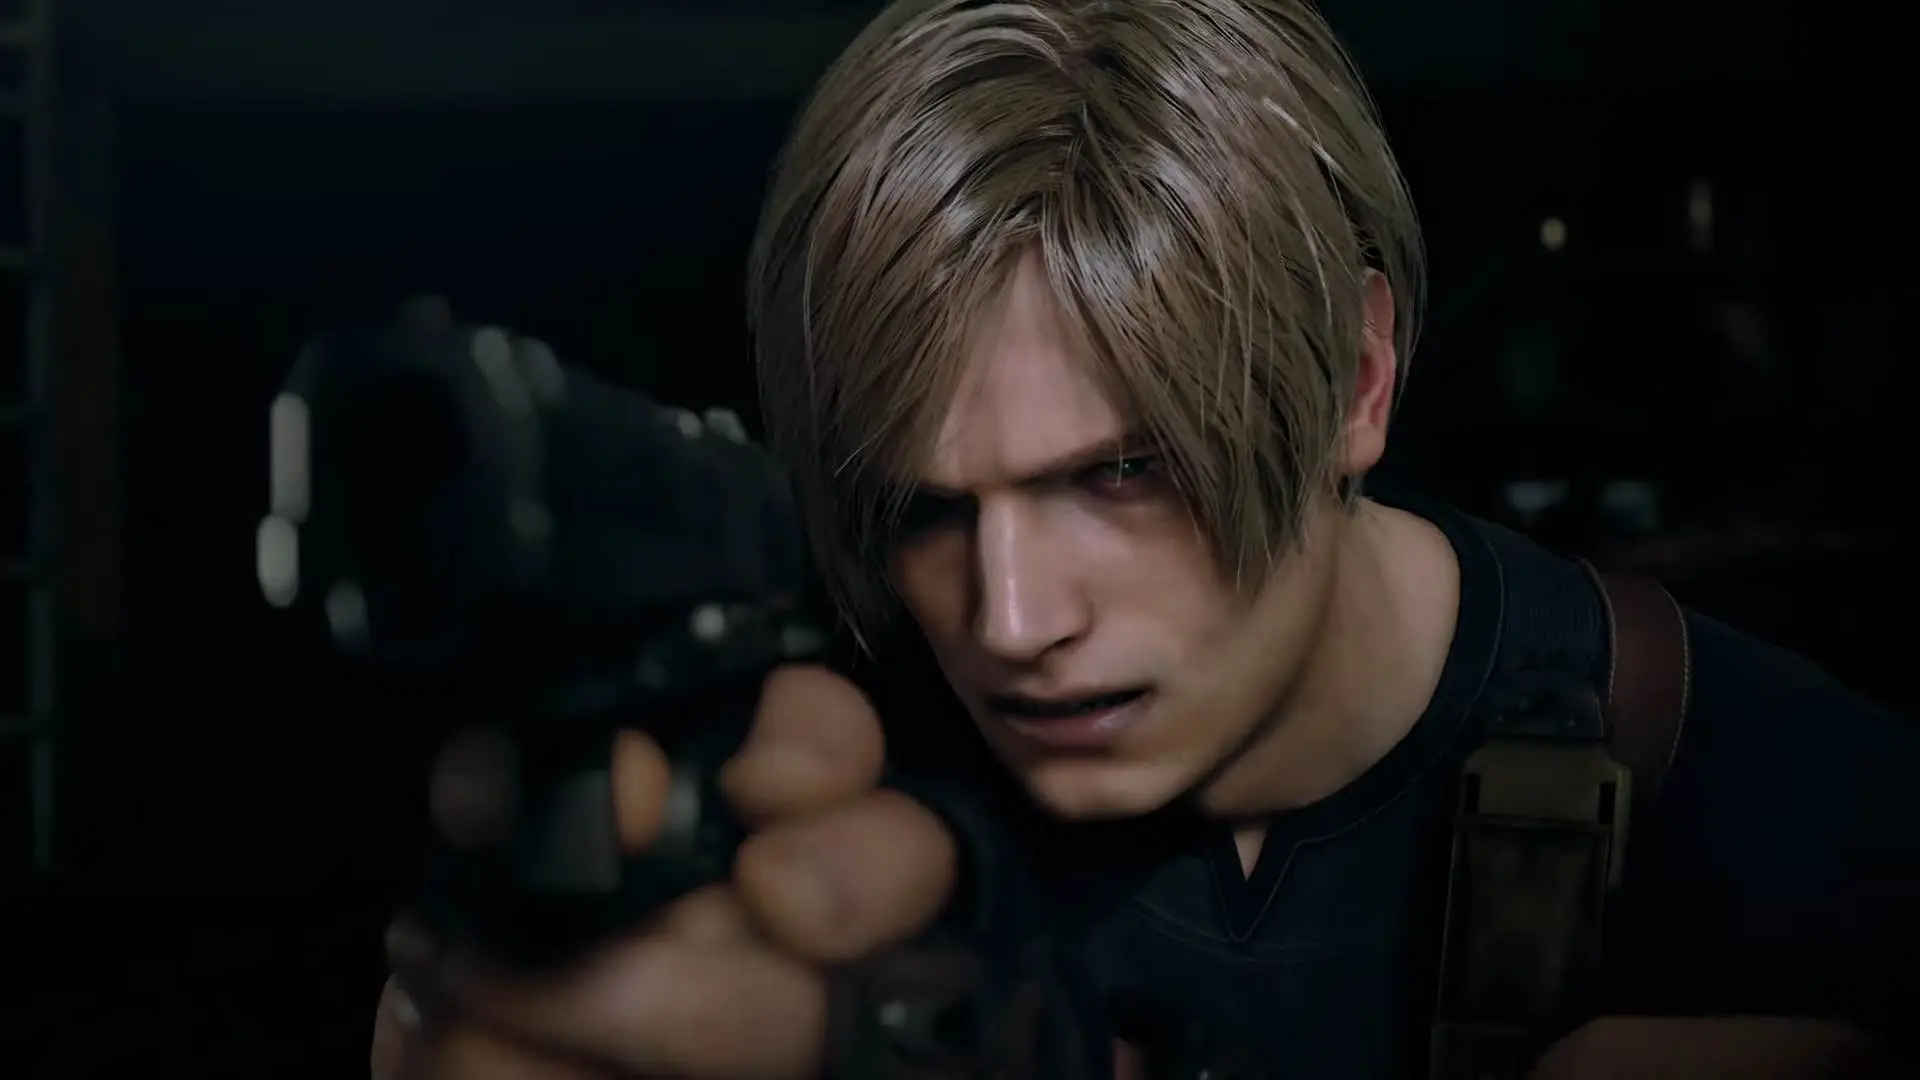 Resident Evil 4 remake shows off the village, combat, merchant, and more